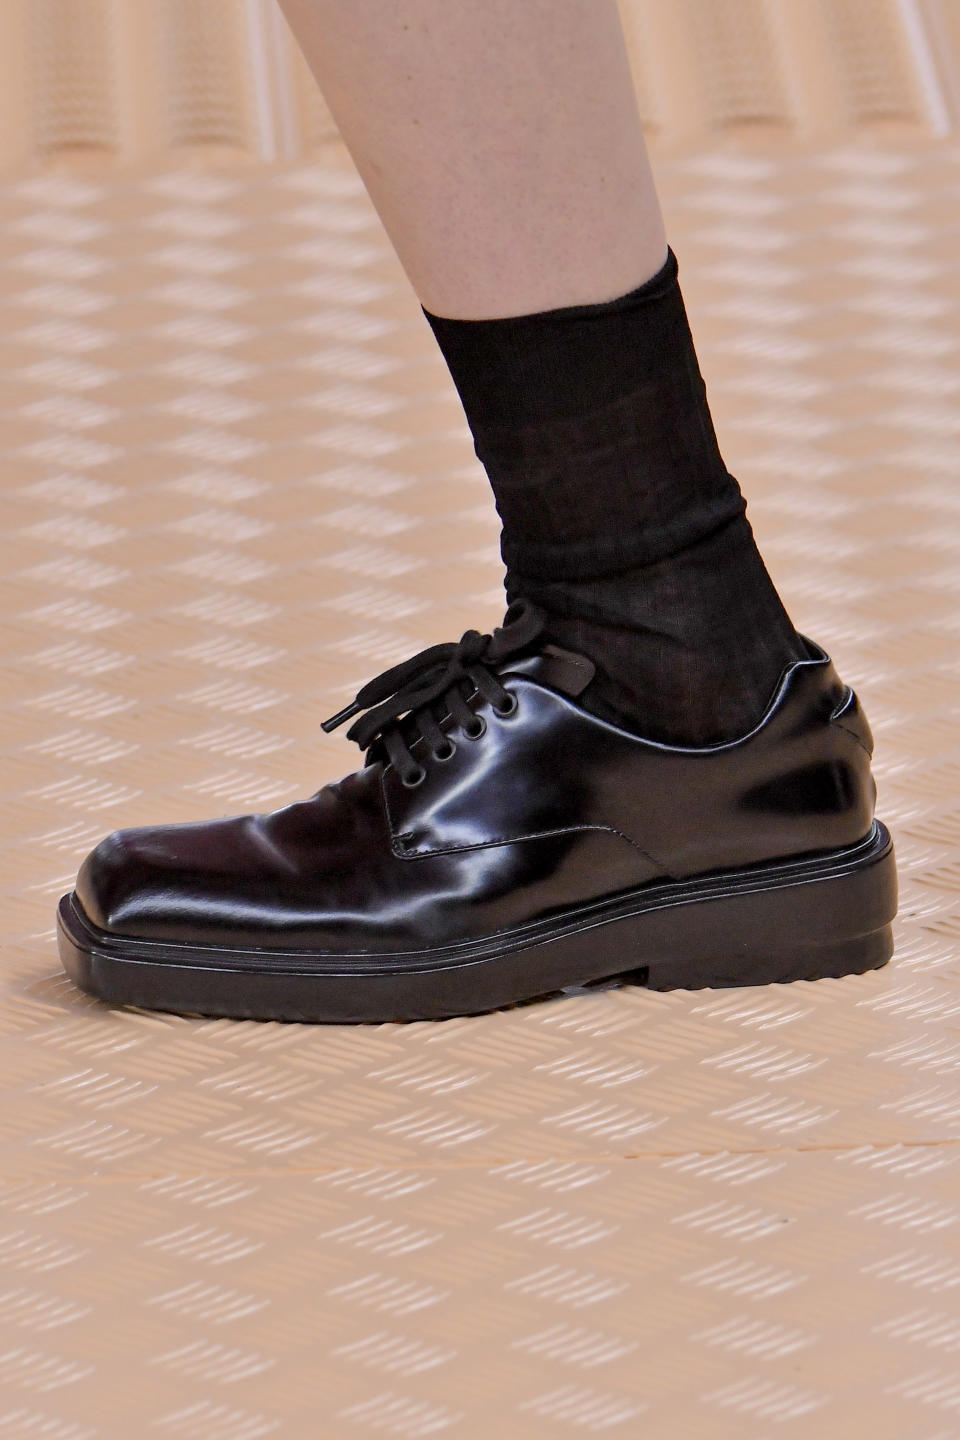 Pictured: Prada Ready, Image: Victor VIRGILE/Gamma-Rapho via Getty Images